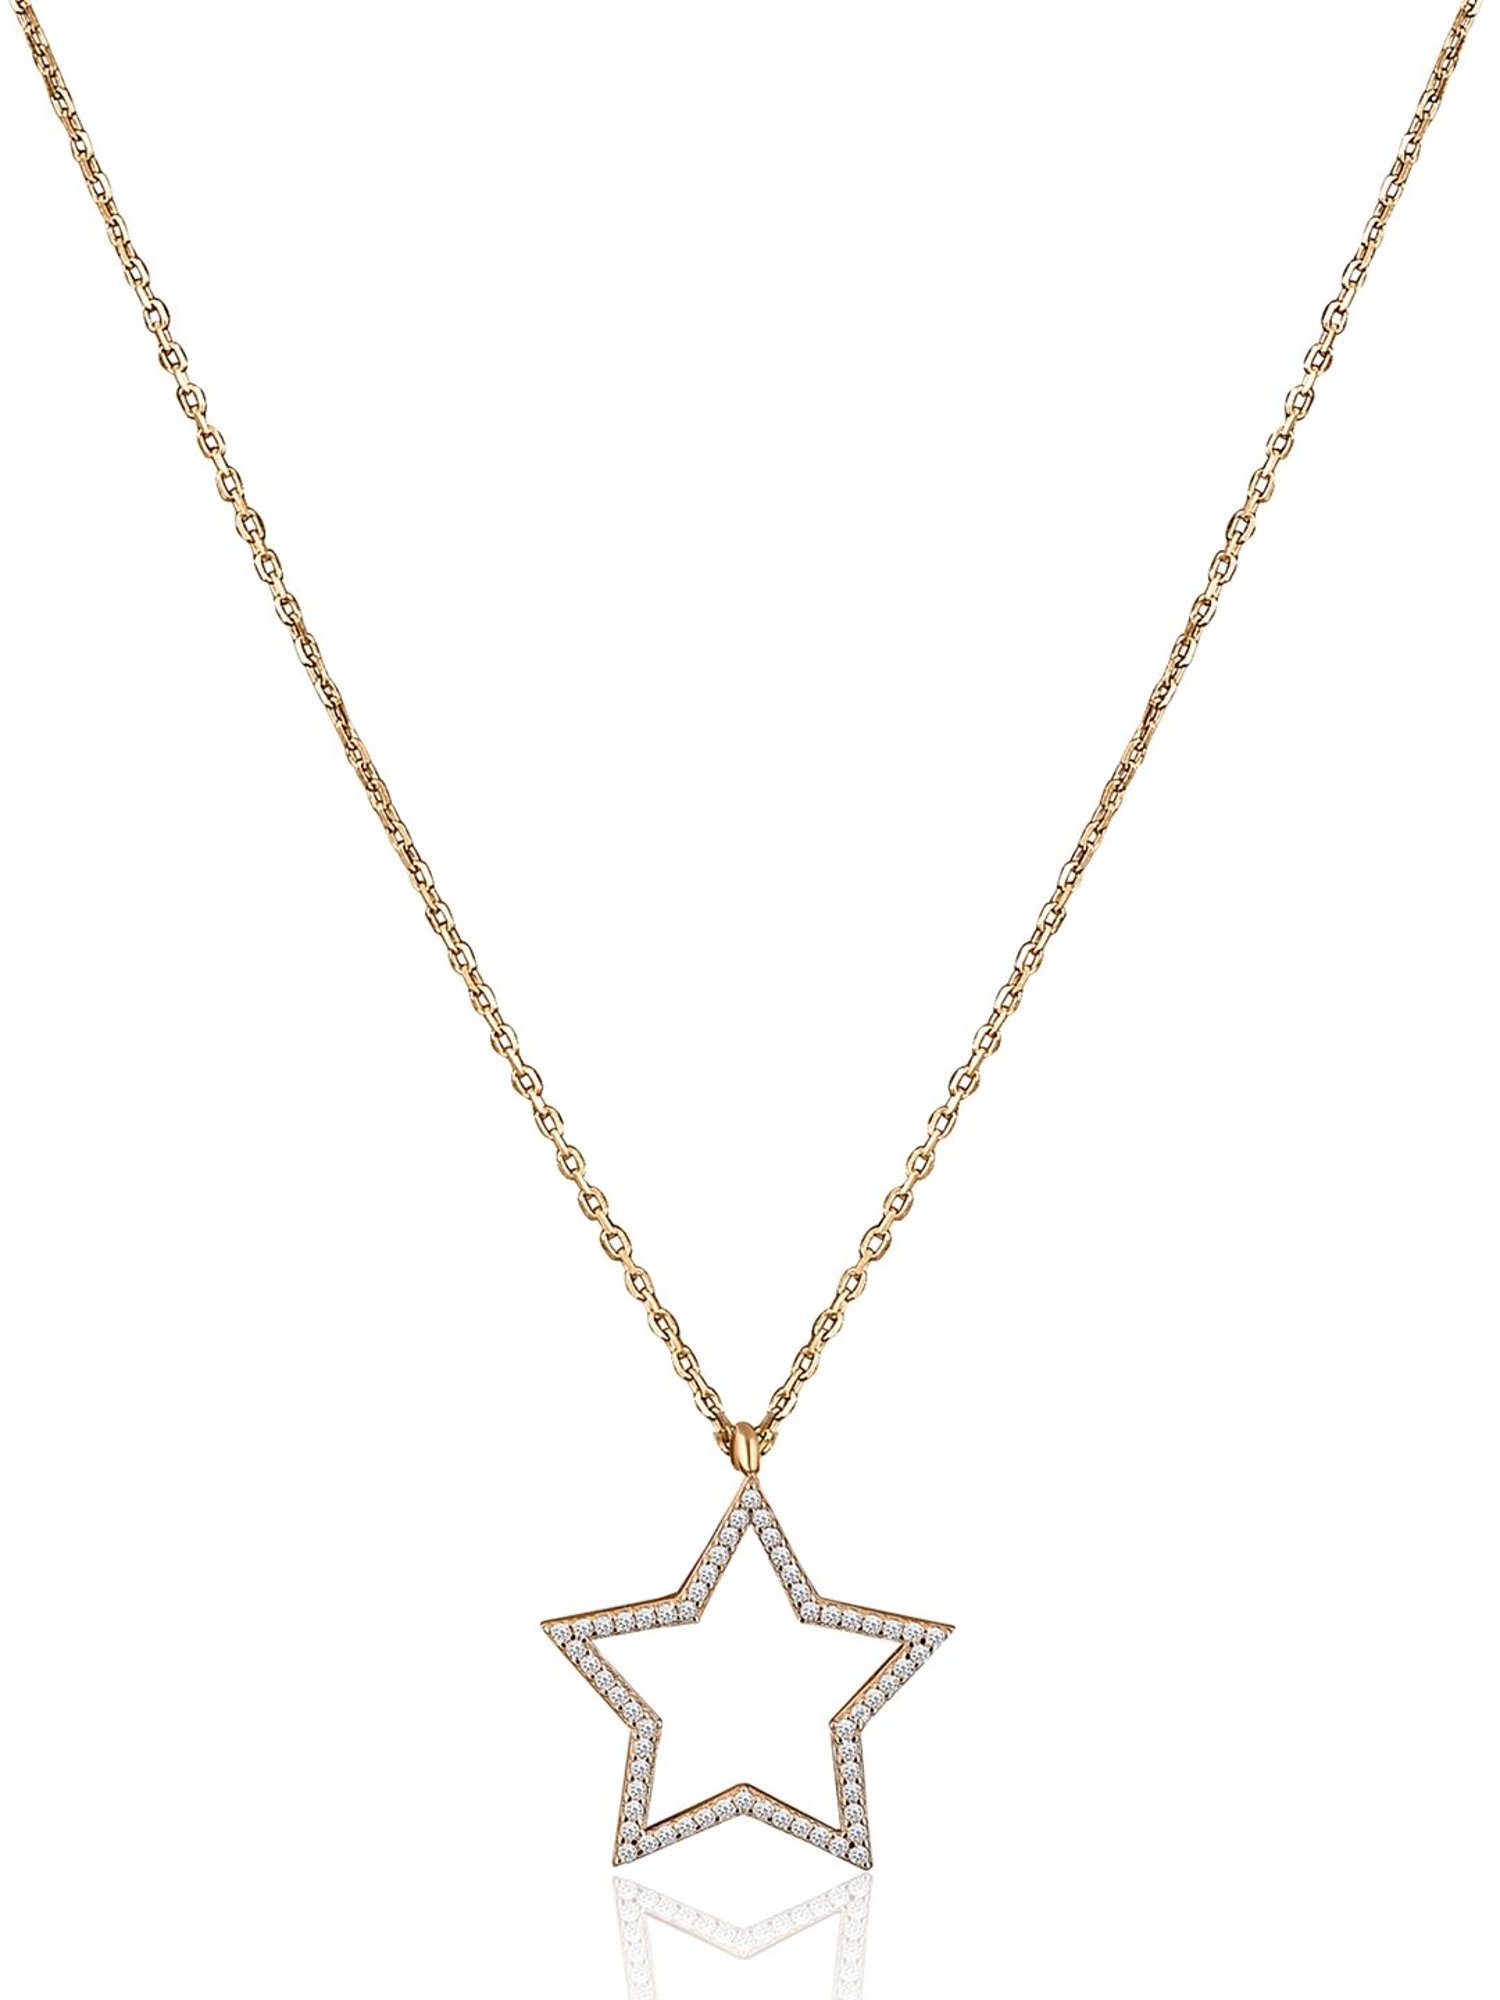 Diamond Shooting Star Necklace Sterling Silver 17